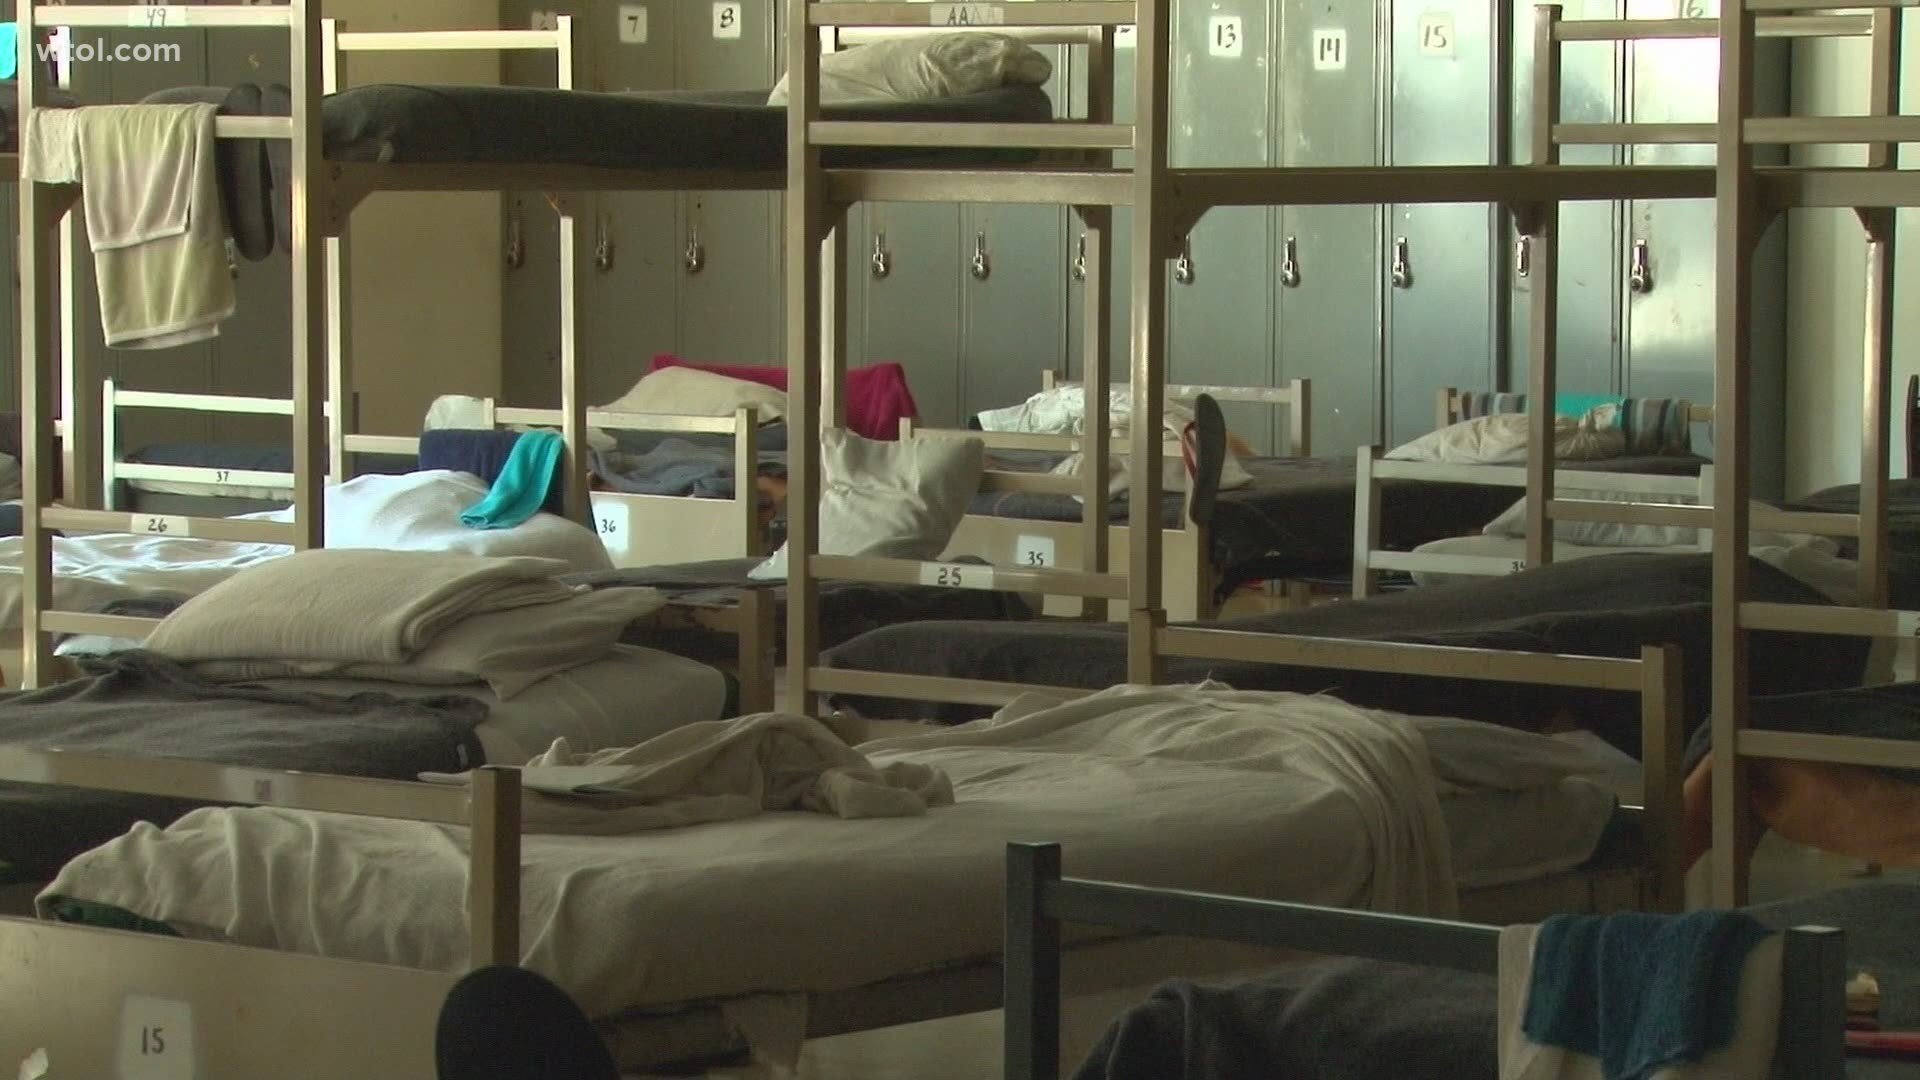 WTOL 11 has learned CCNO has made 55 beds available to U.S. Marshals for inmates who will be transferred out of the Northeast Ohio Correctional Center in Youngstown.